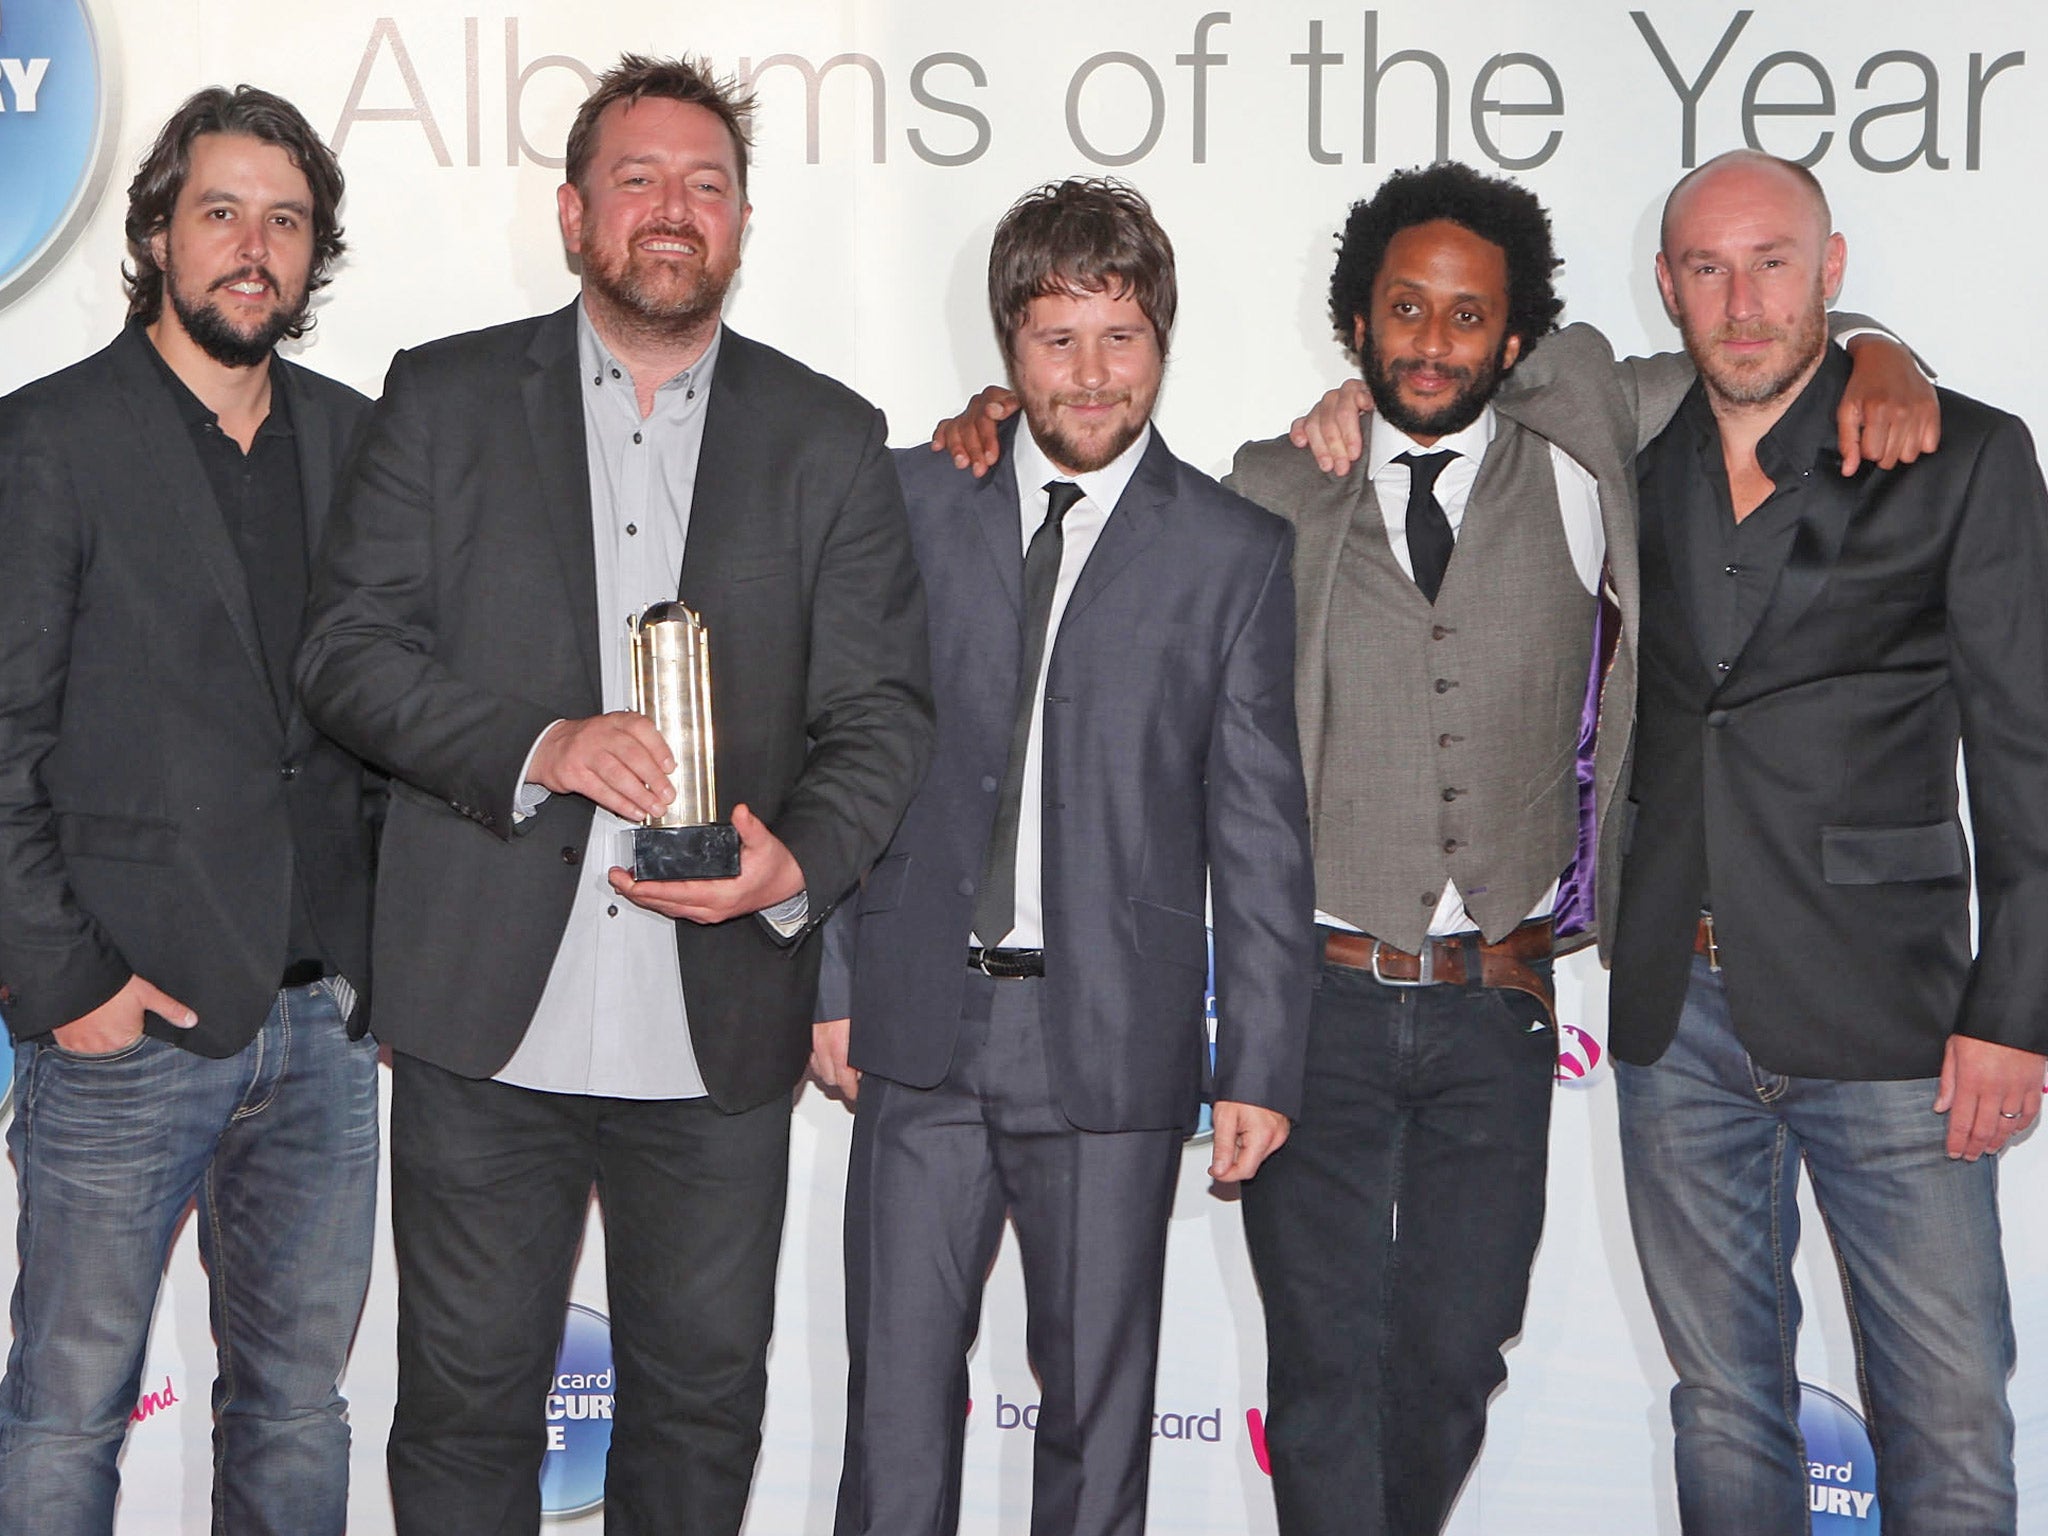 Elbow at the 2011 Mercury Prize ceremony. The band won the award in 2008